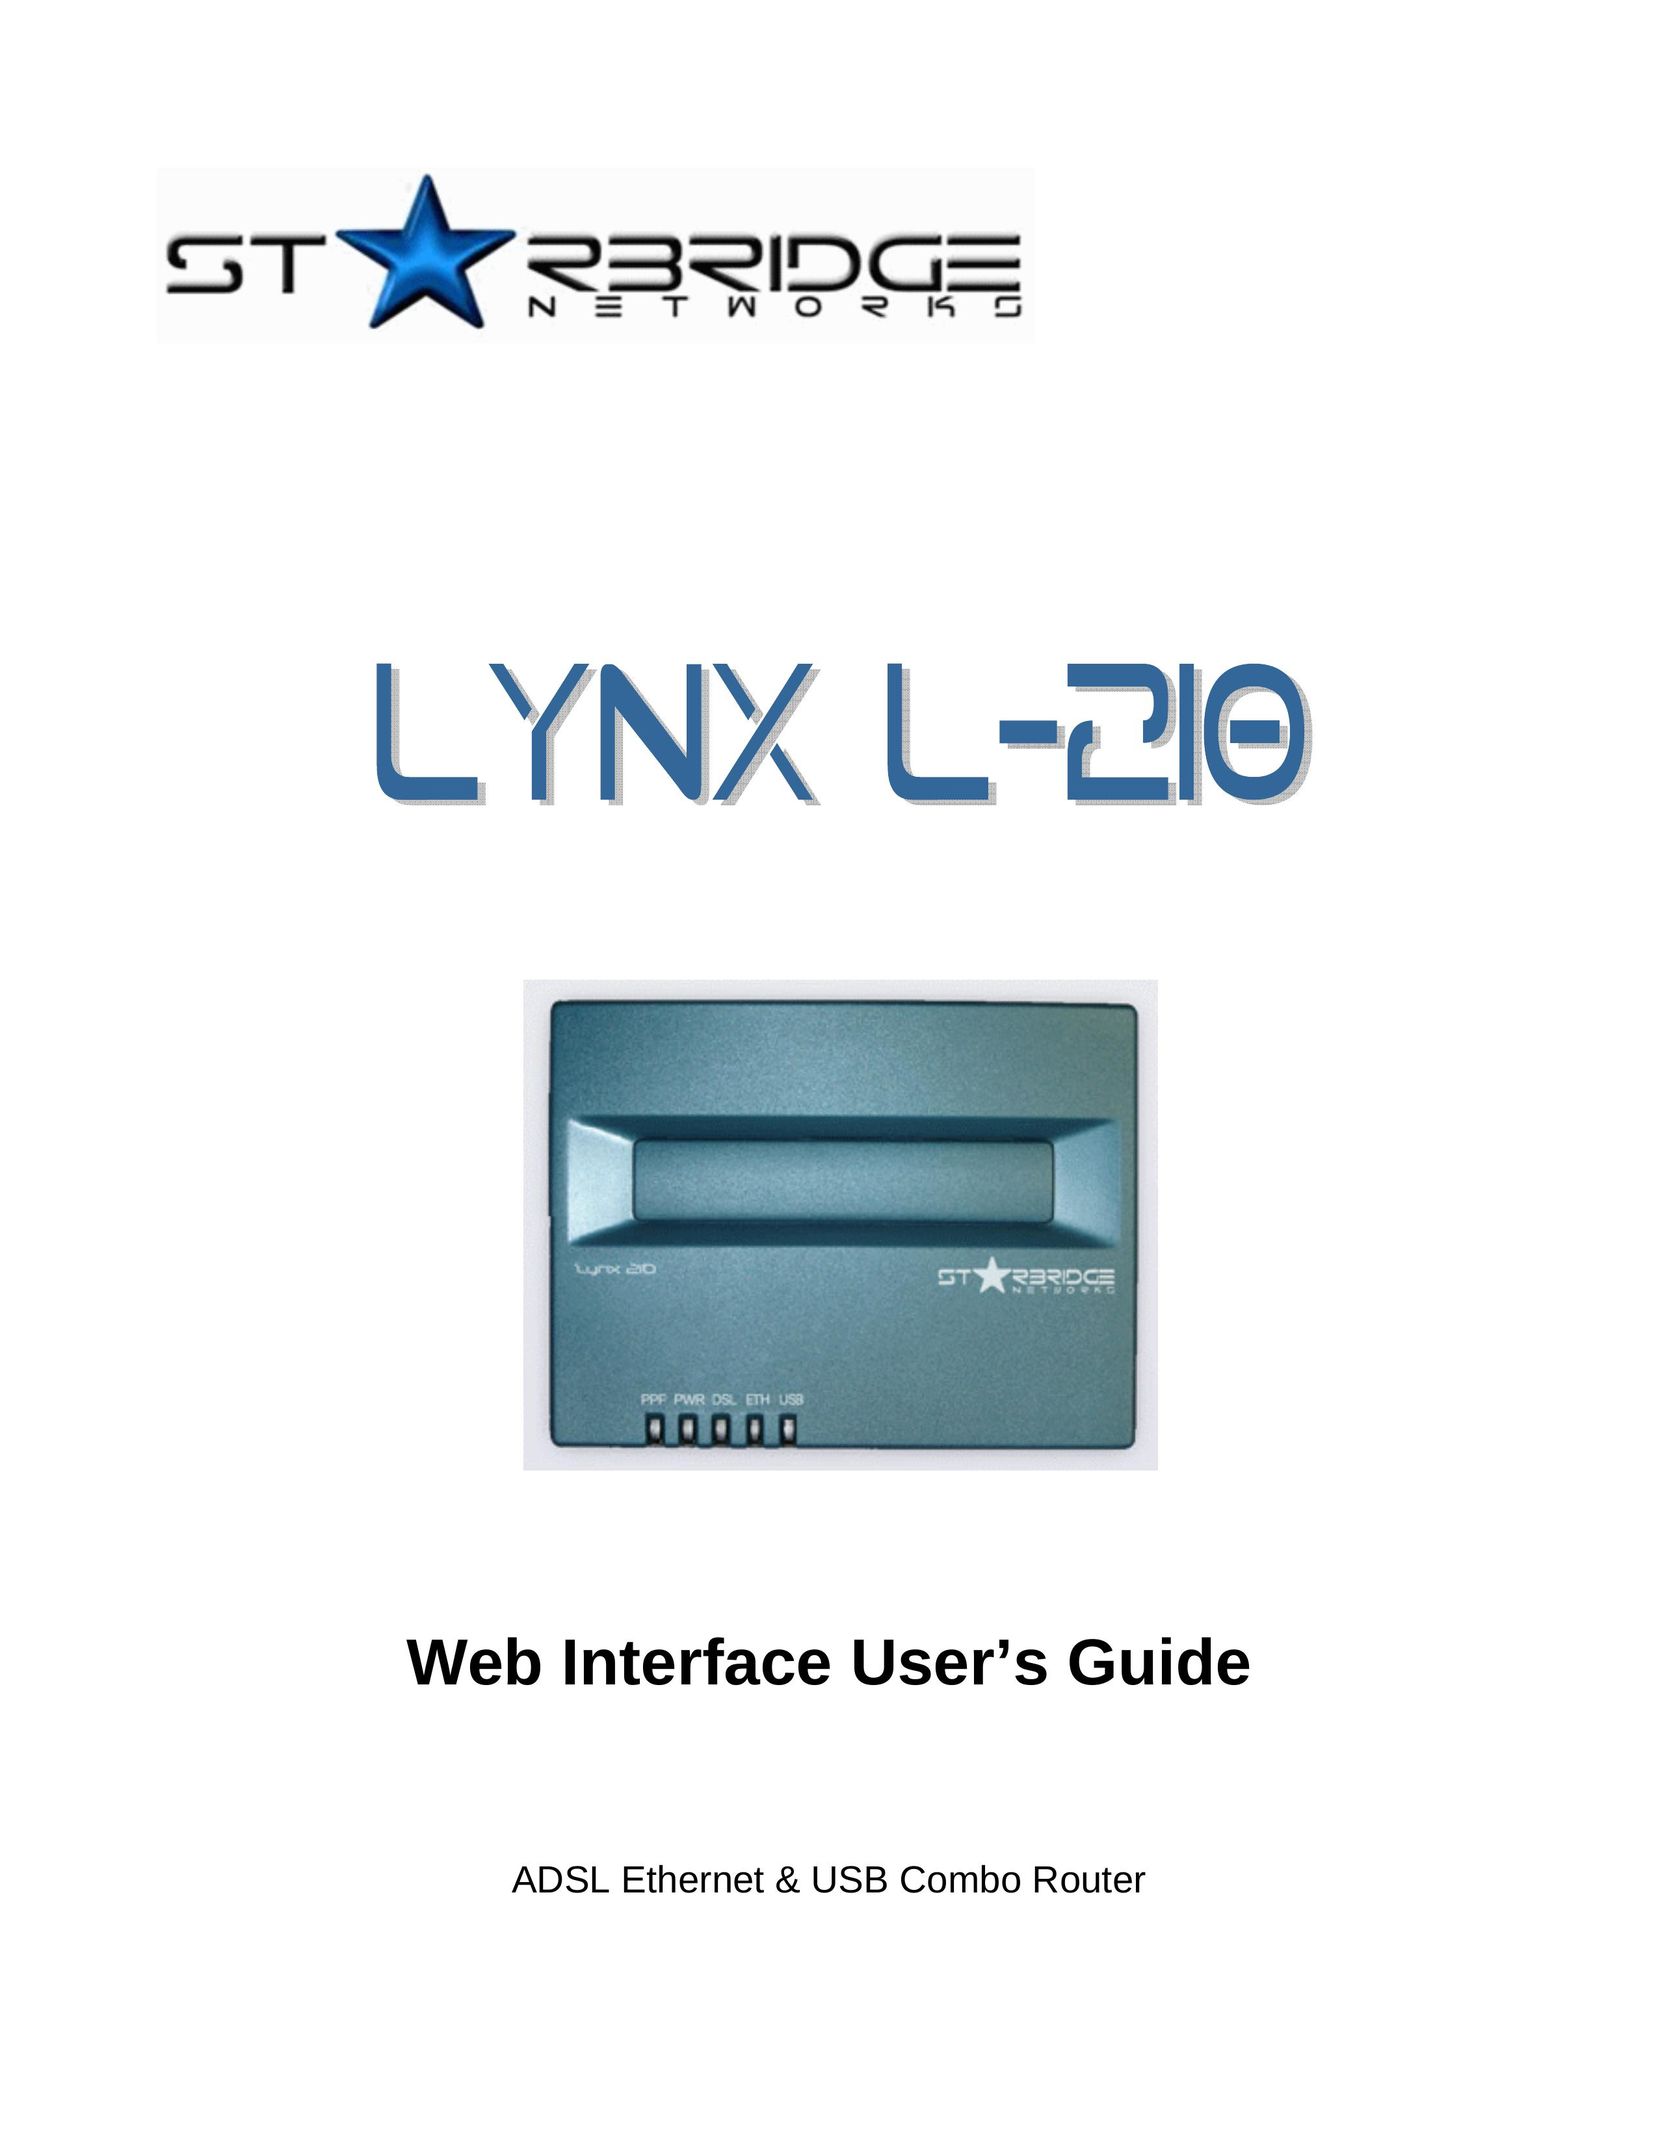 Lynx L-210 Network Router User Manual